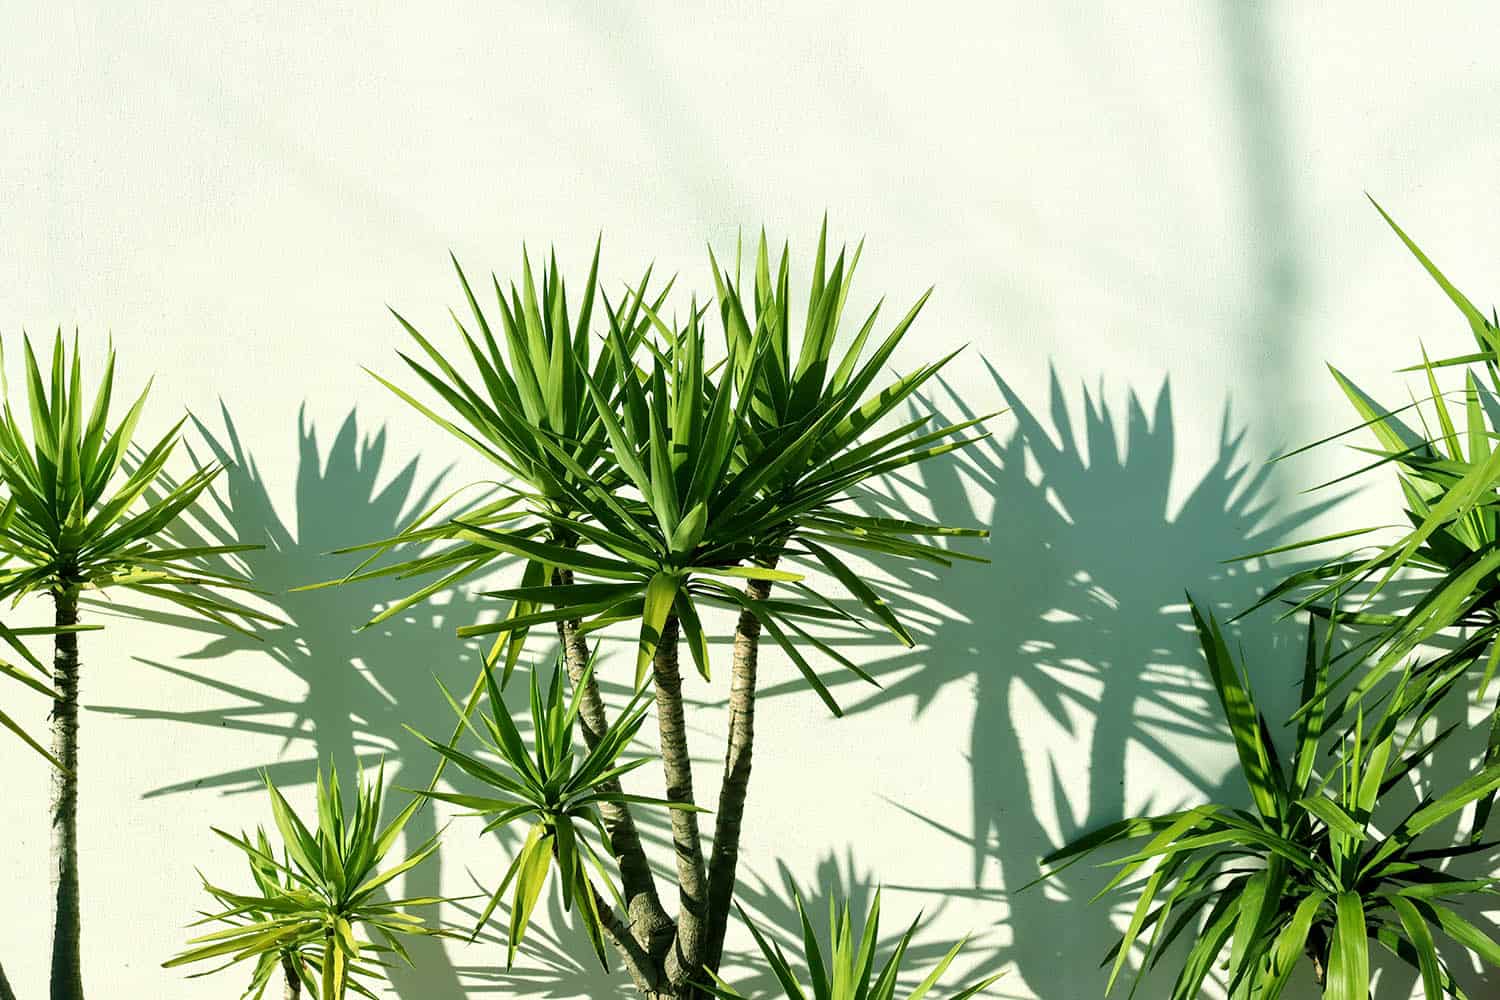 dracaena house plants outdoors: what can they survive? can you put